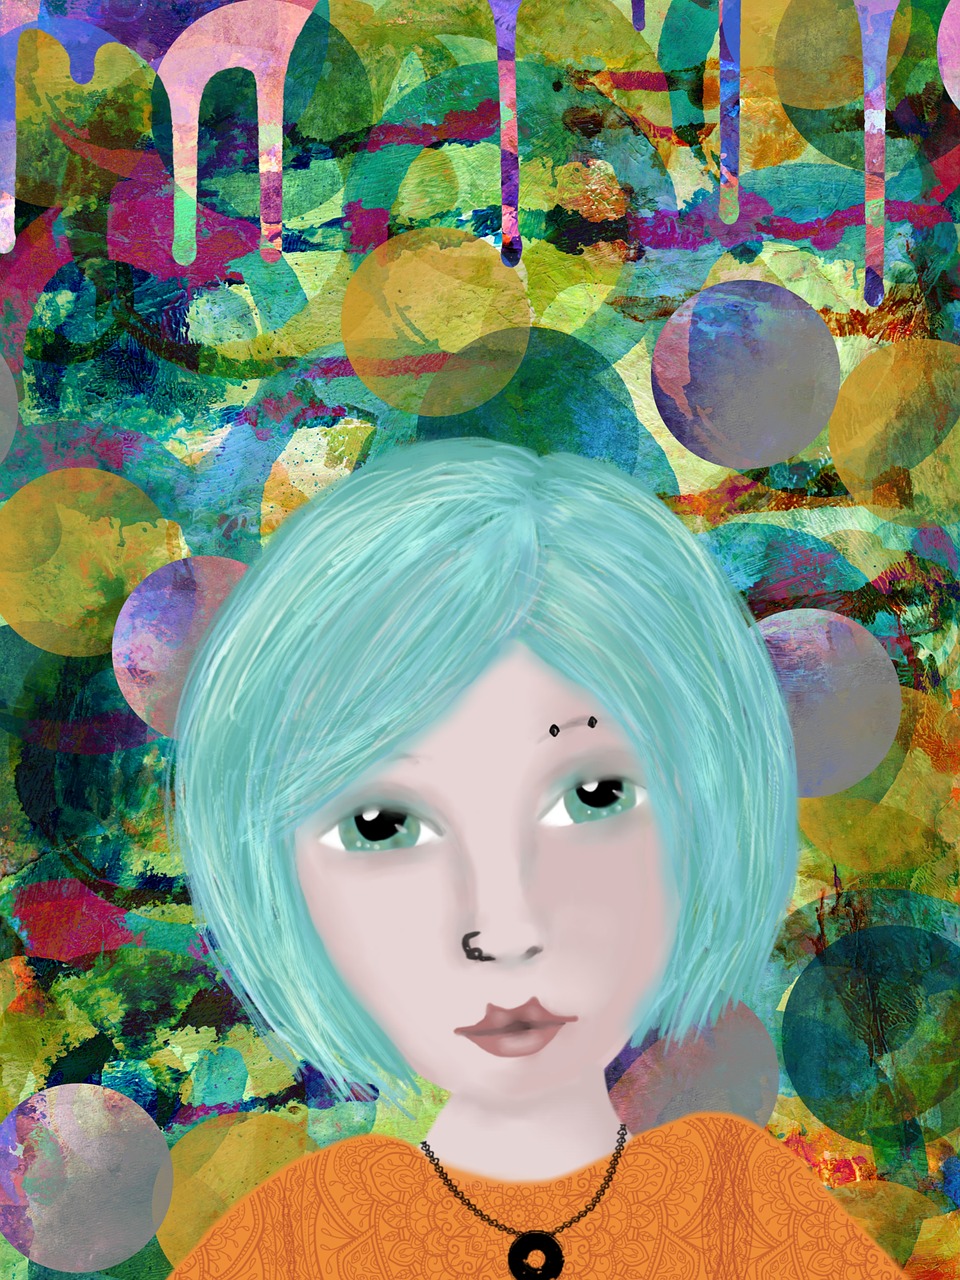 a digital painting of a woman with blue hair, a digital painting, inspired by Nara Yoshitomo, digital art, magic world. colorful, mixed media with claymorphism, floating. greenish blue, childrens illustration